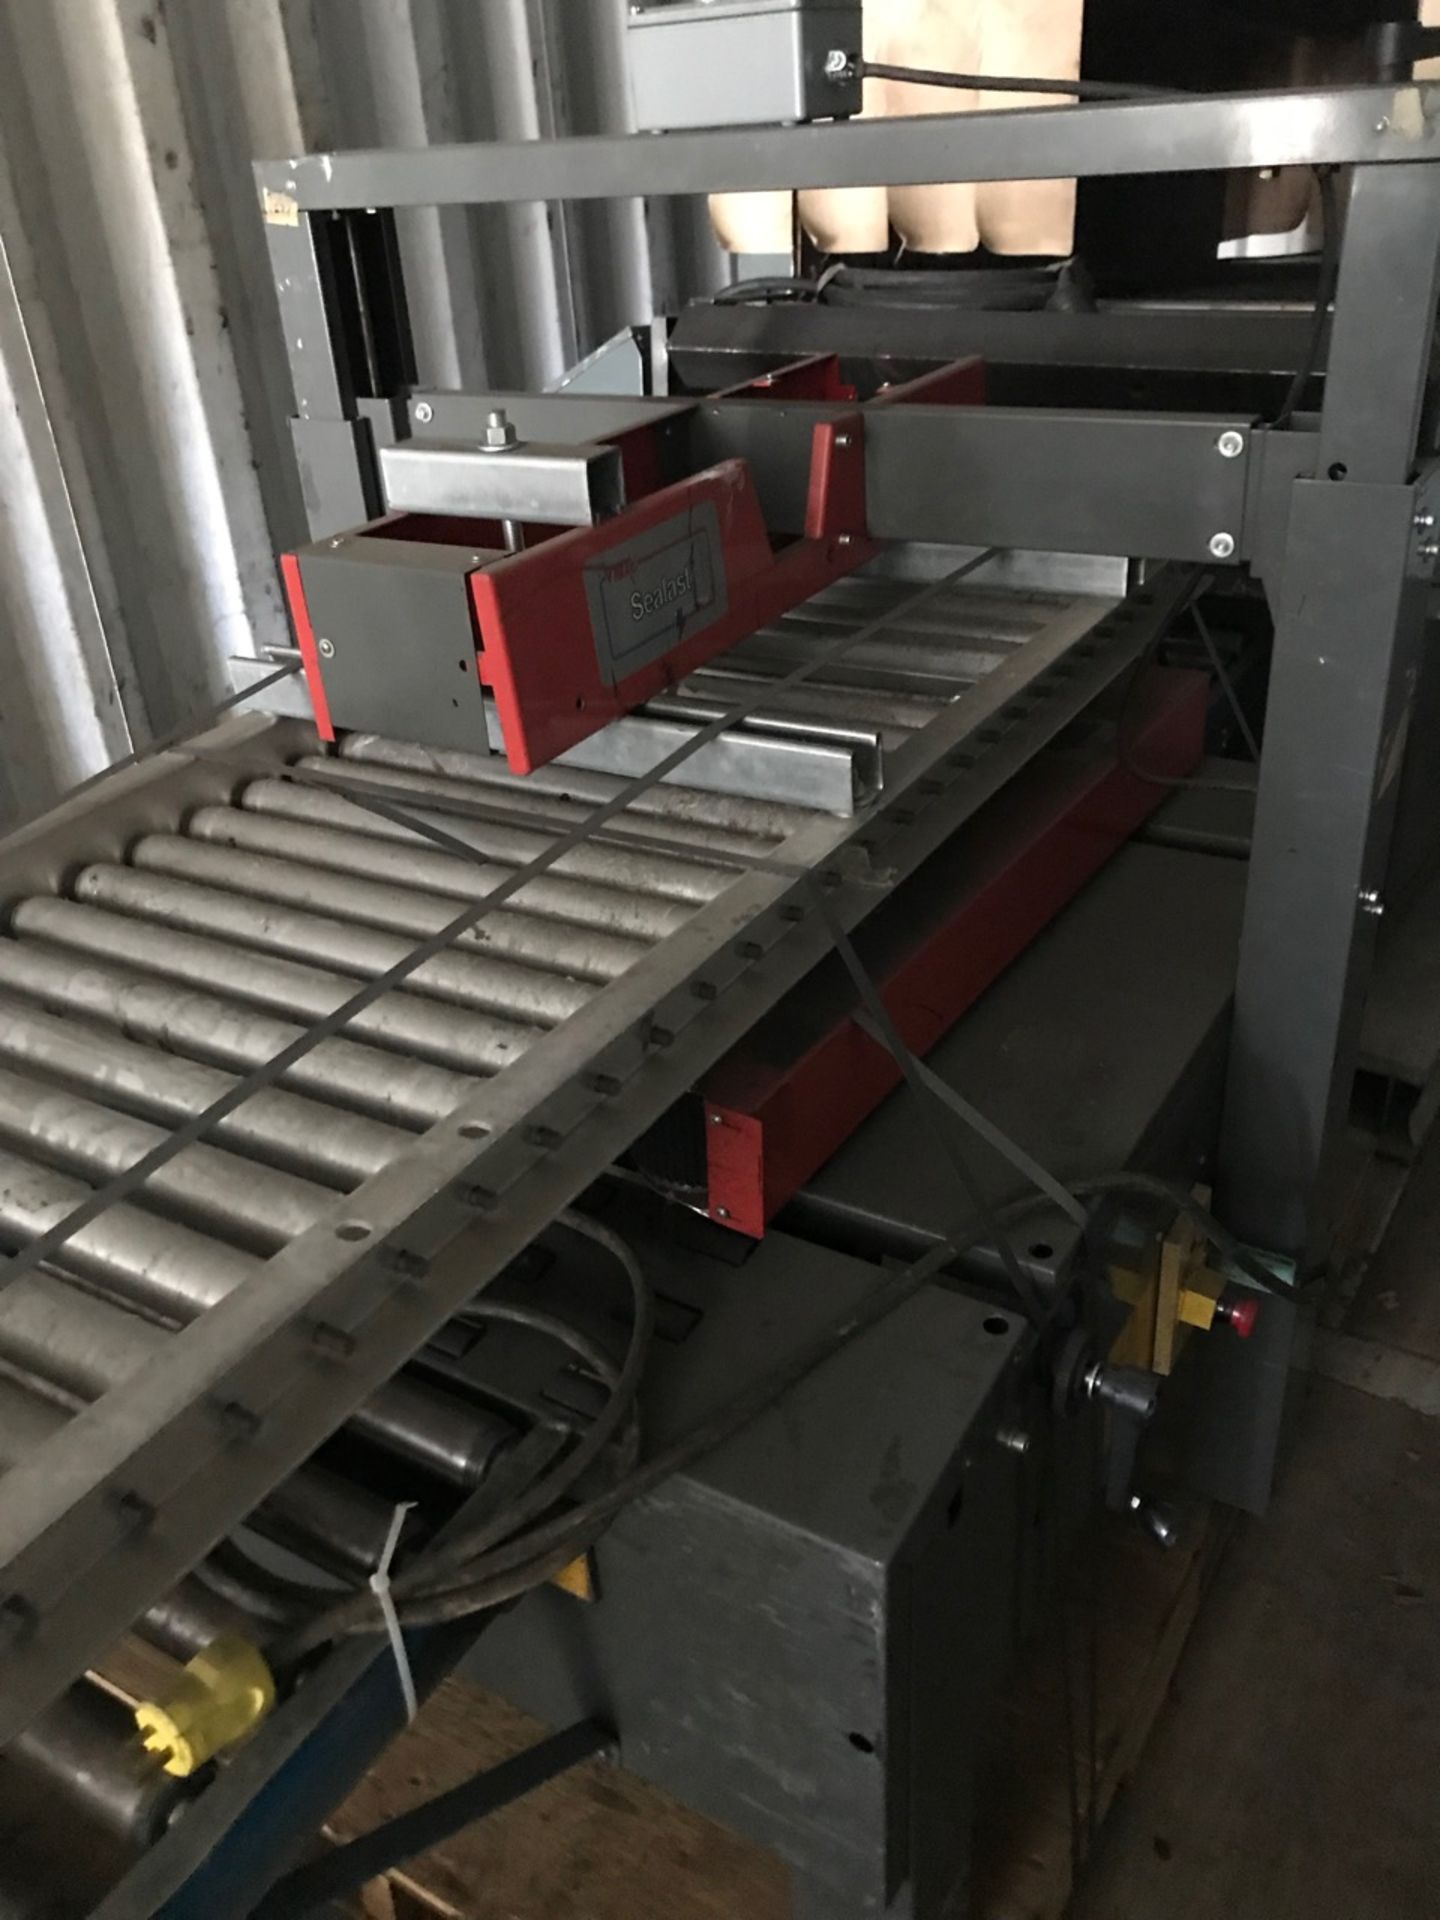 VIBAC SEALAST 50M ROBOPAC TOP & BOTTOM CASE SEALER(LOCATED IN CHATEAUGUAY, QC)